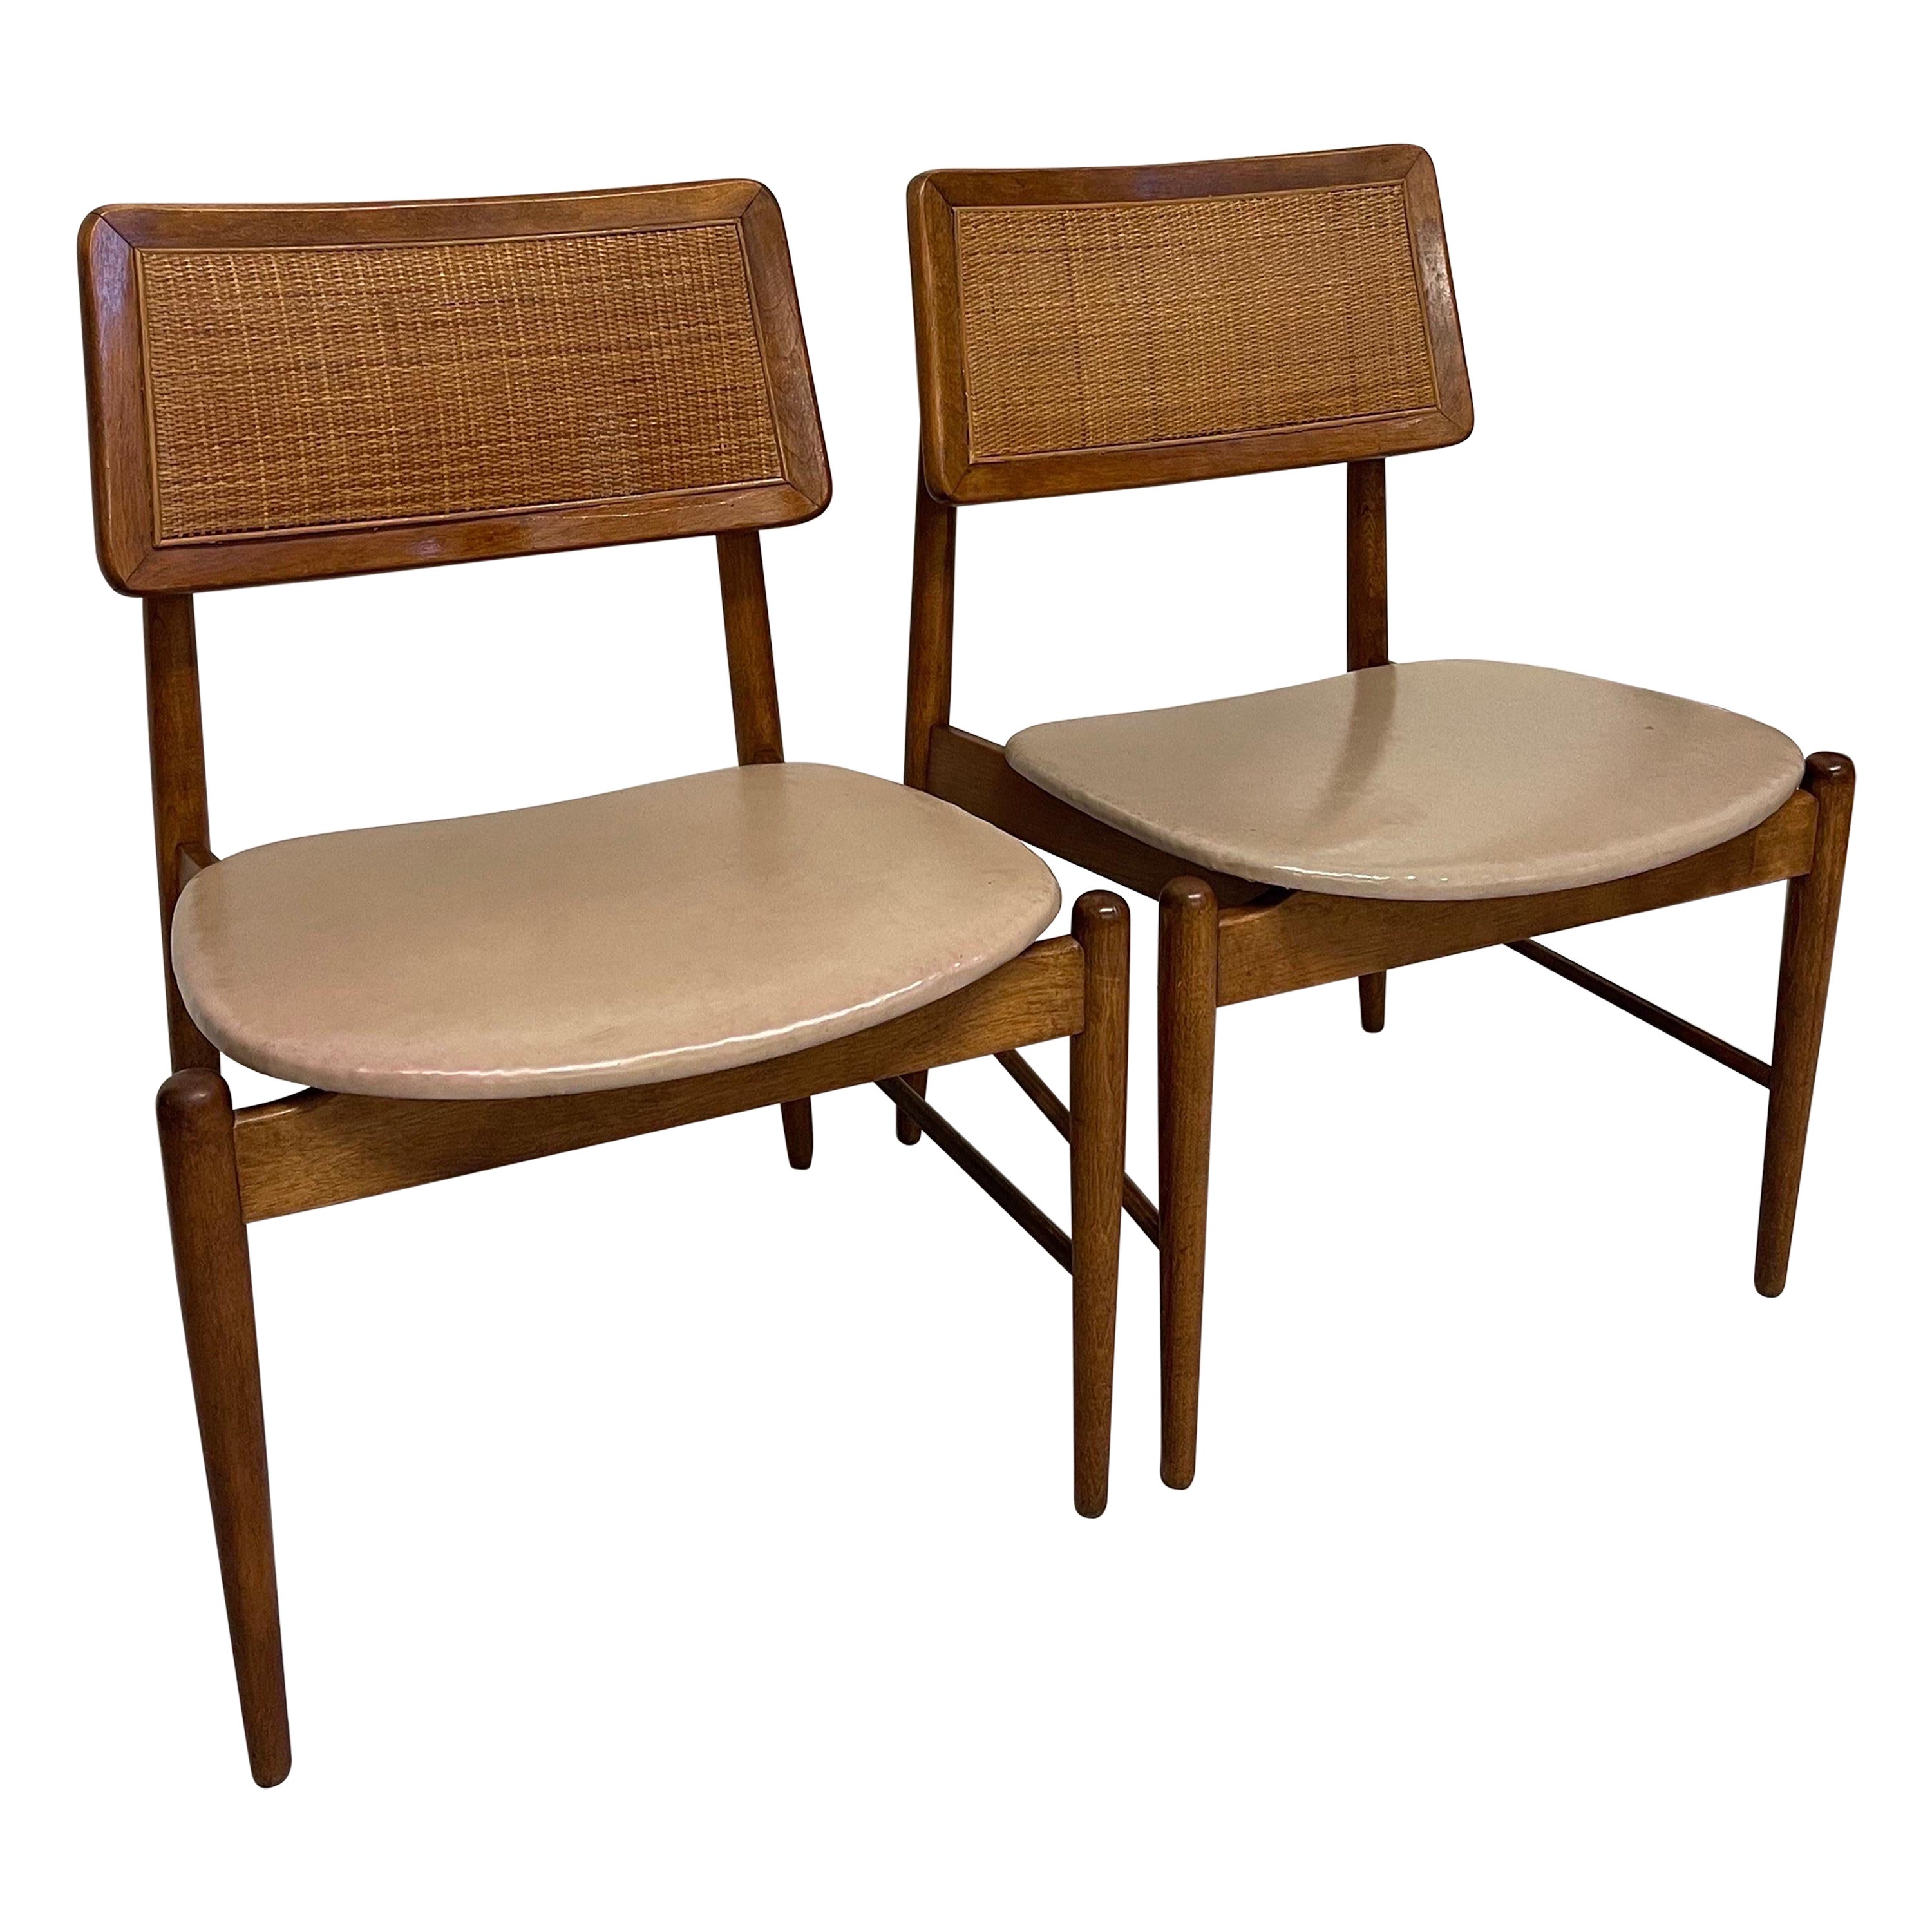 Vintage Danish Modern Style Pair of Rattan Chairs. For Sale